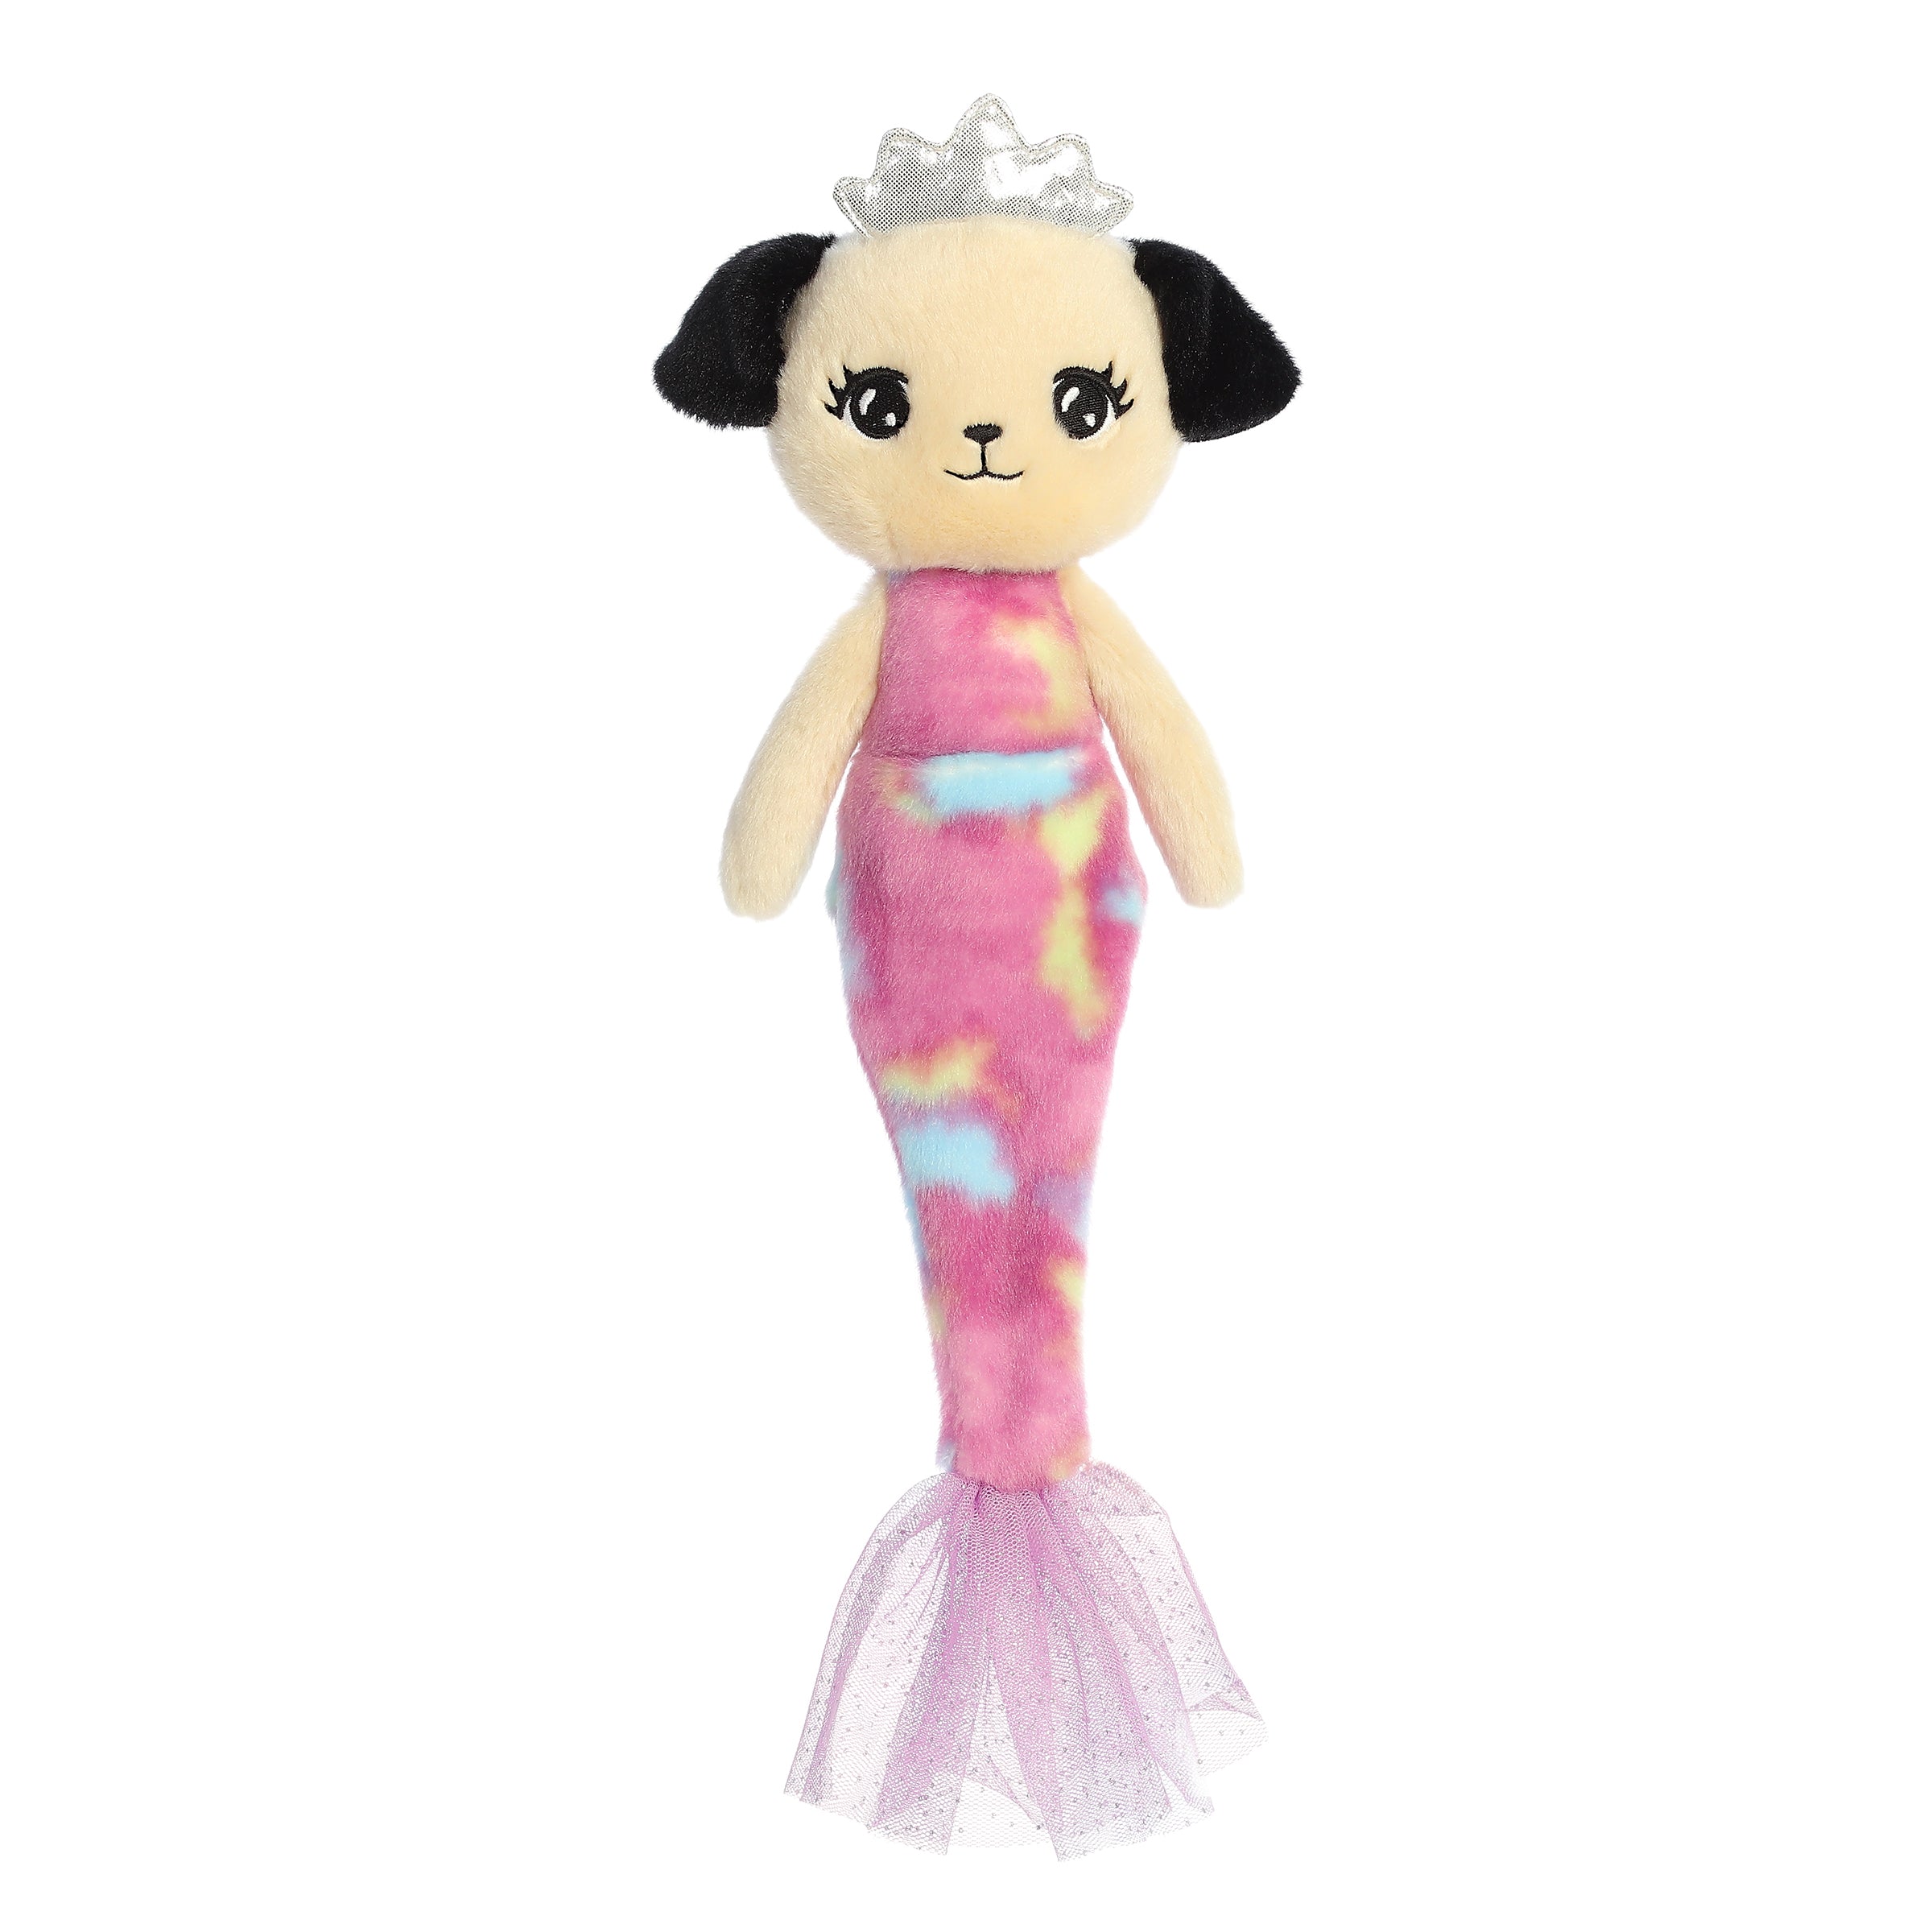 Tan Merpuppy plush with black ears & pink mermaid tail in purple-blue tulle, capturing the essence of sea fantasy.